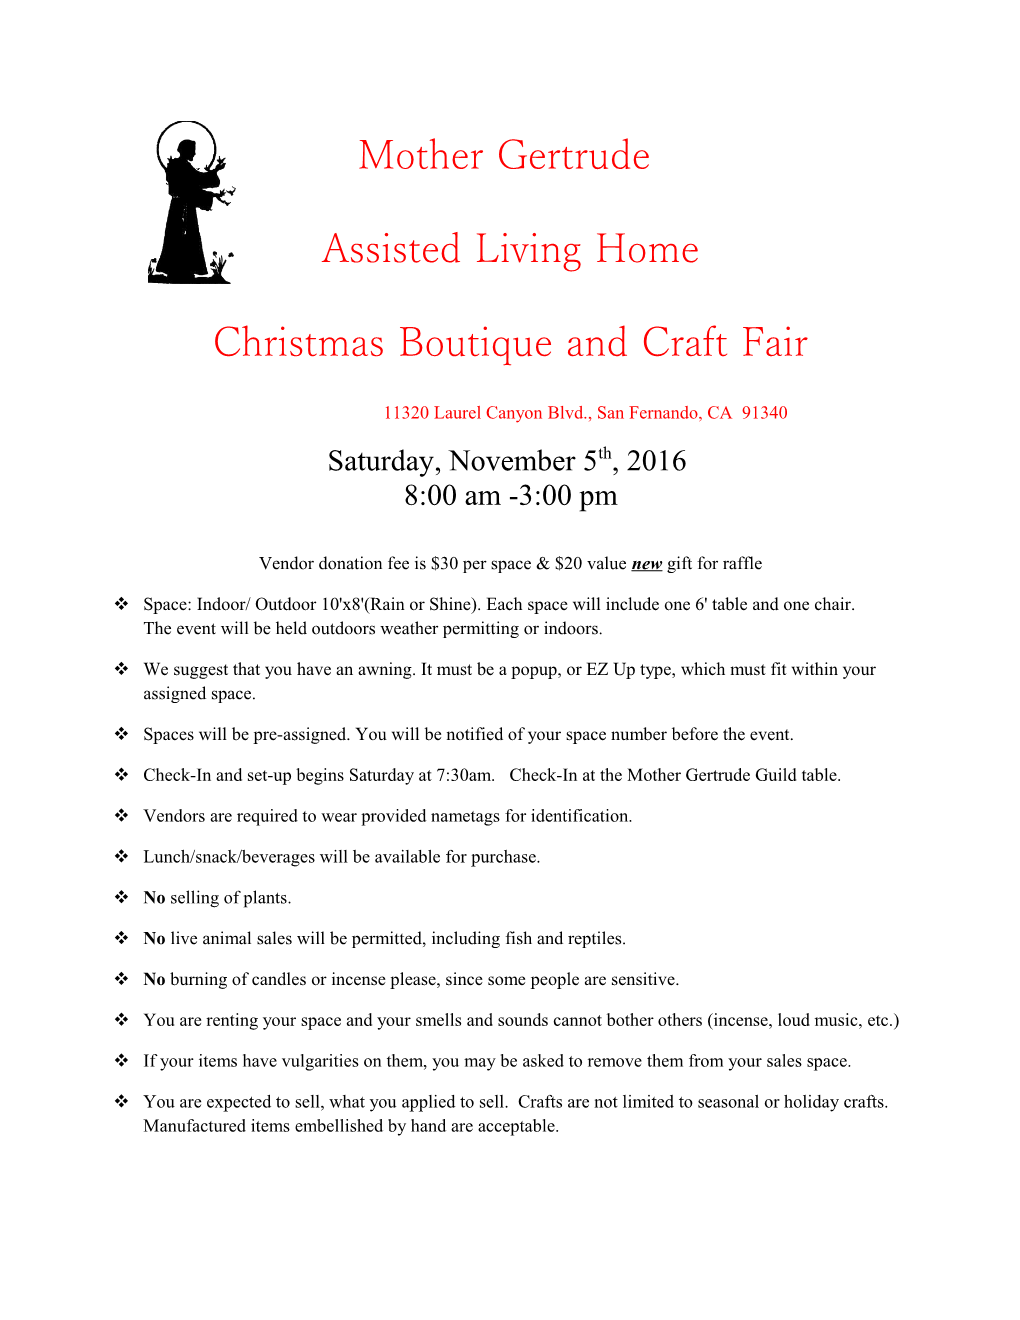 Christmas Boutique and Craft Fair